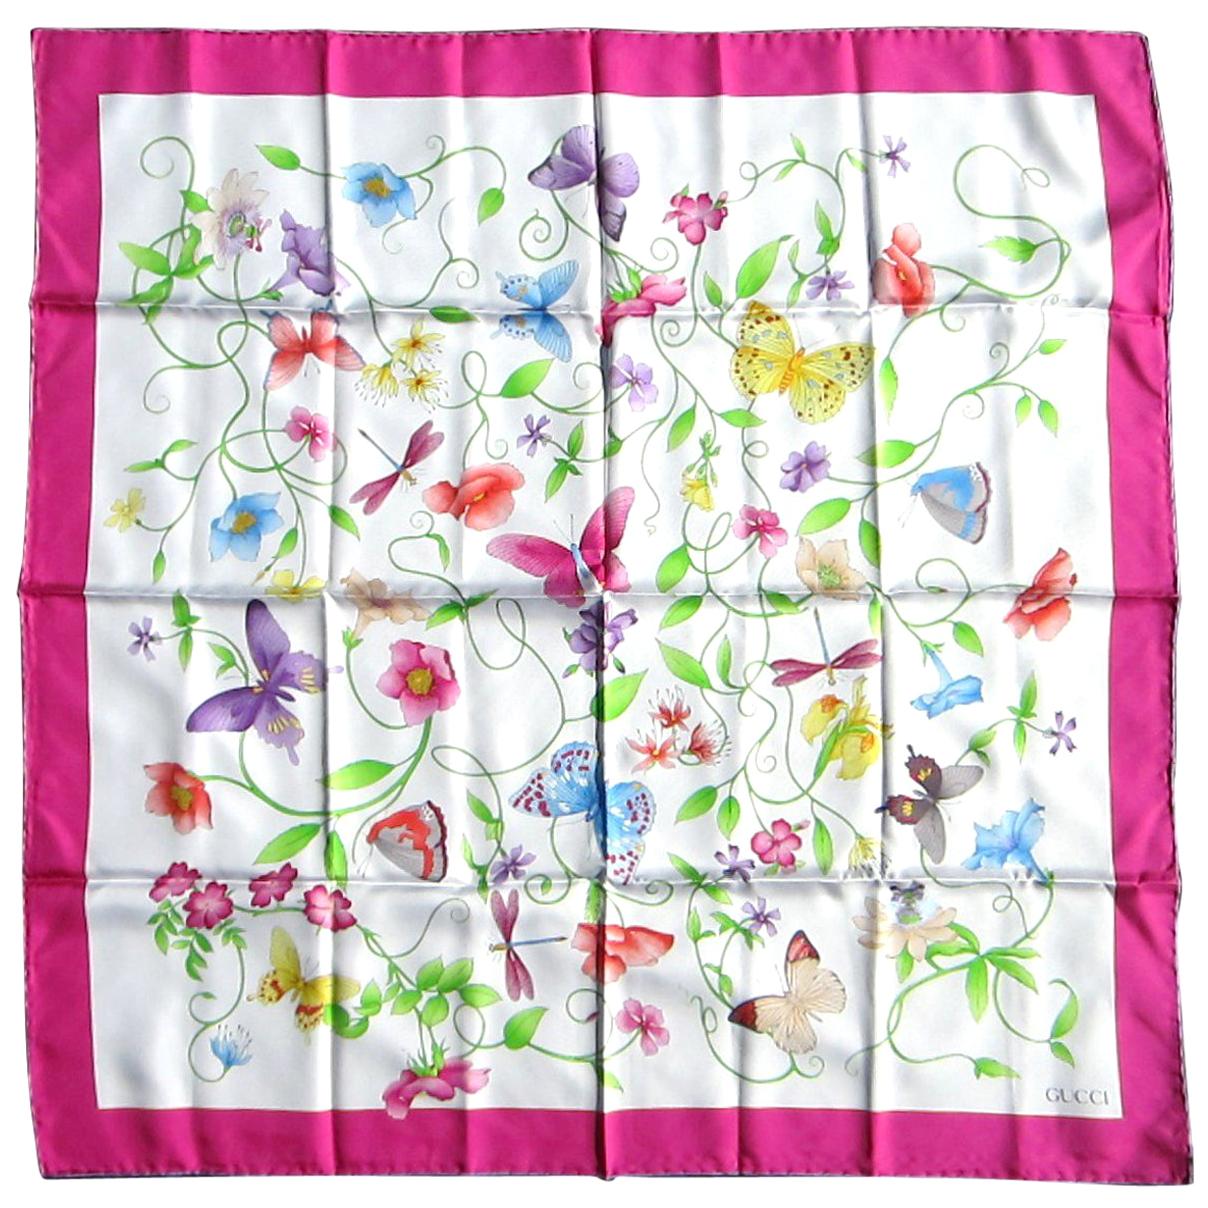  GUCCI silk Scarf  Butterfly - Floral  Never Worn, 1990s 